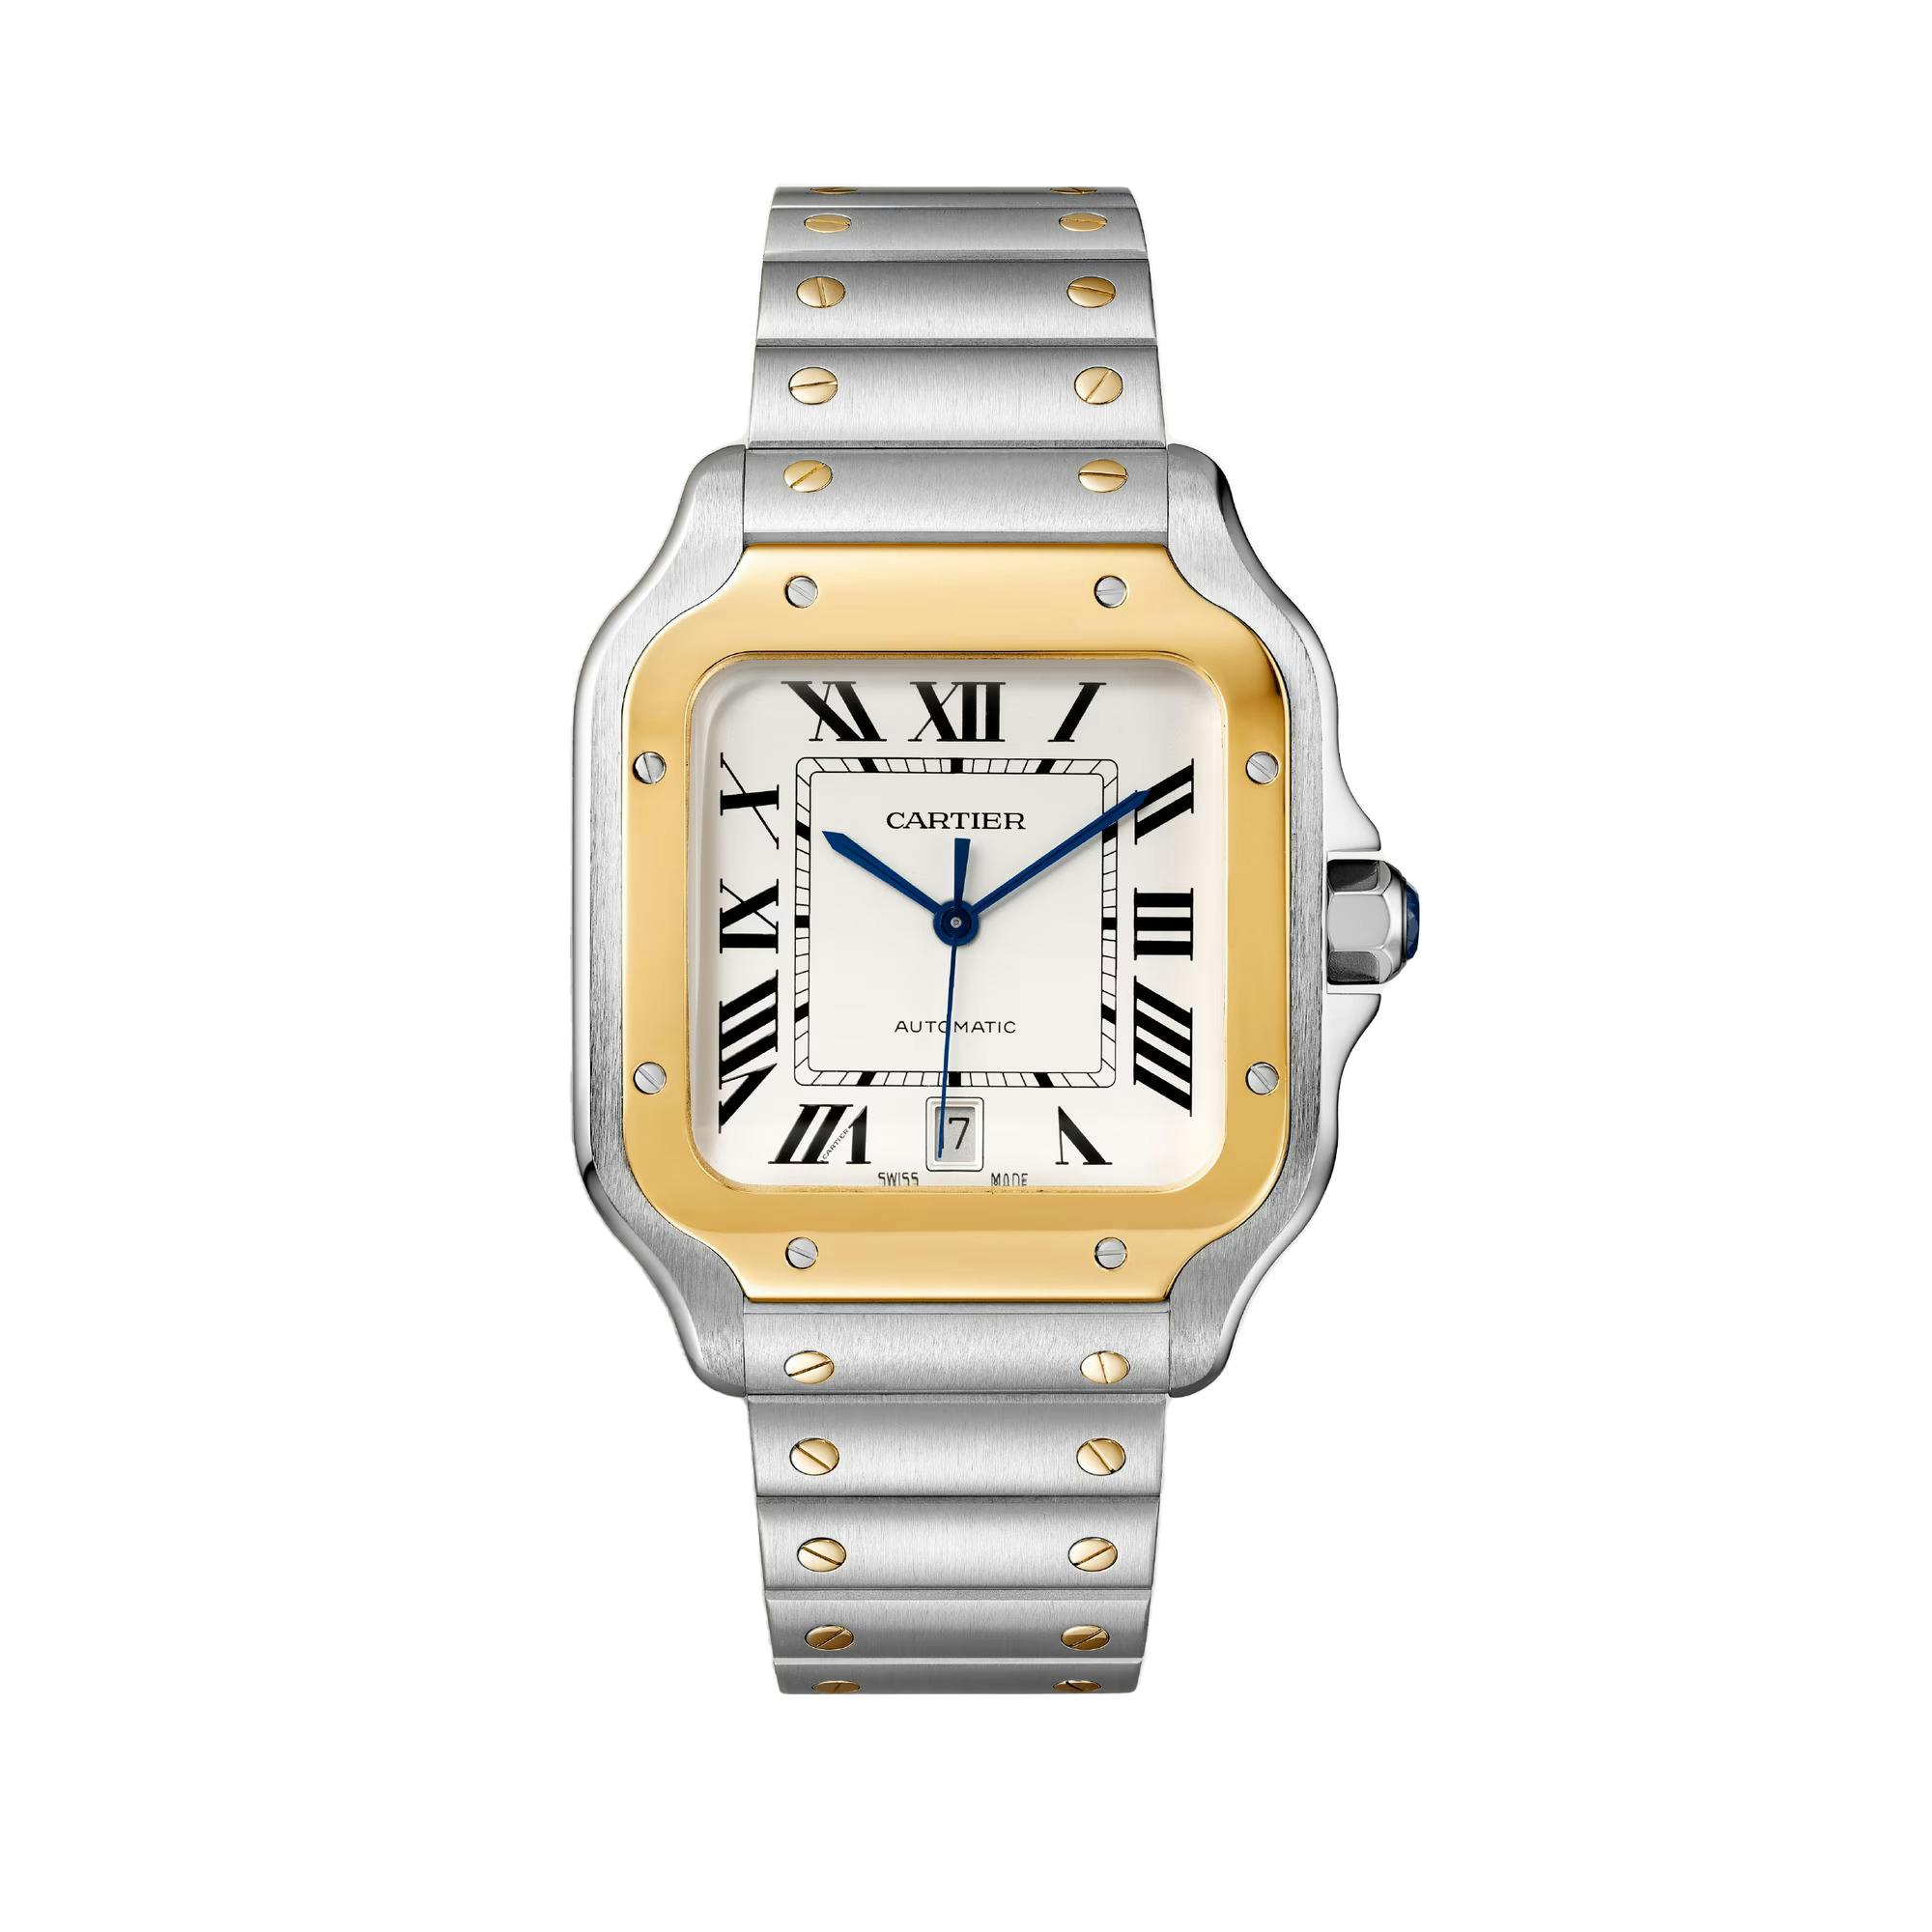 Santos de Cartier Watch with Yellow Gold, large model